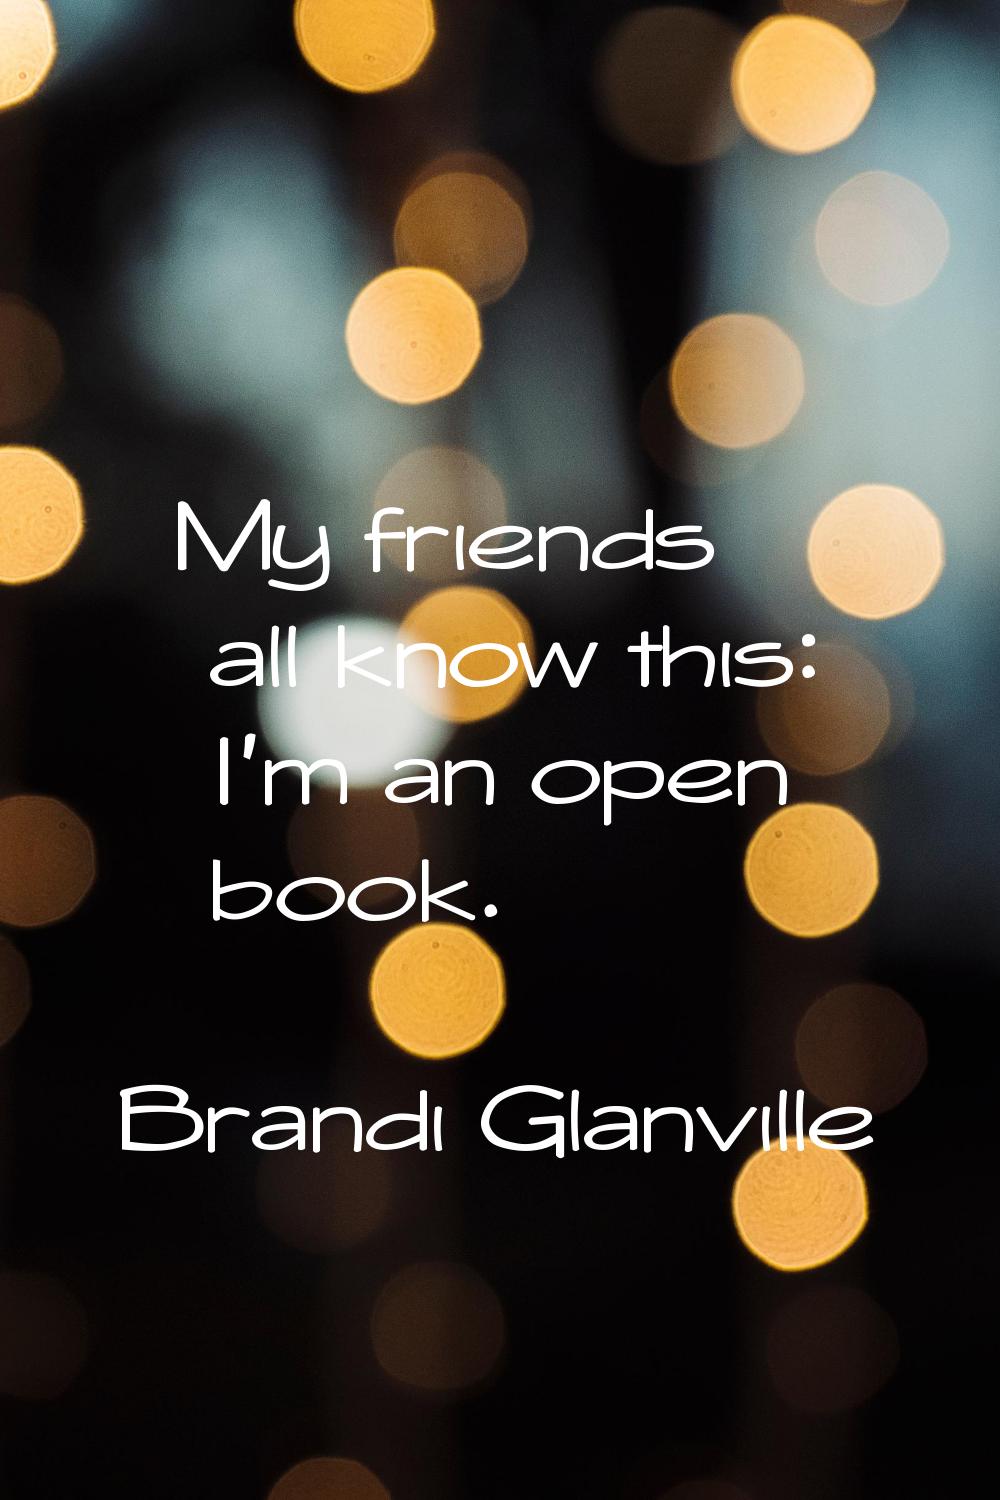 My friends all know this: I'm an open book.